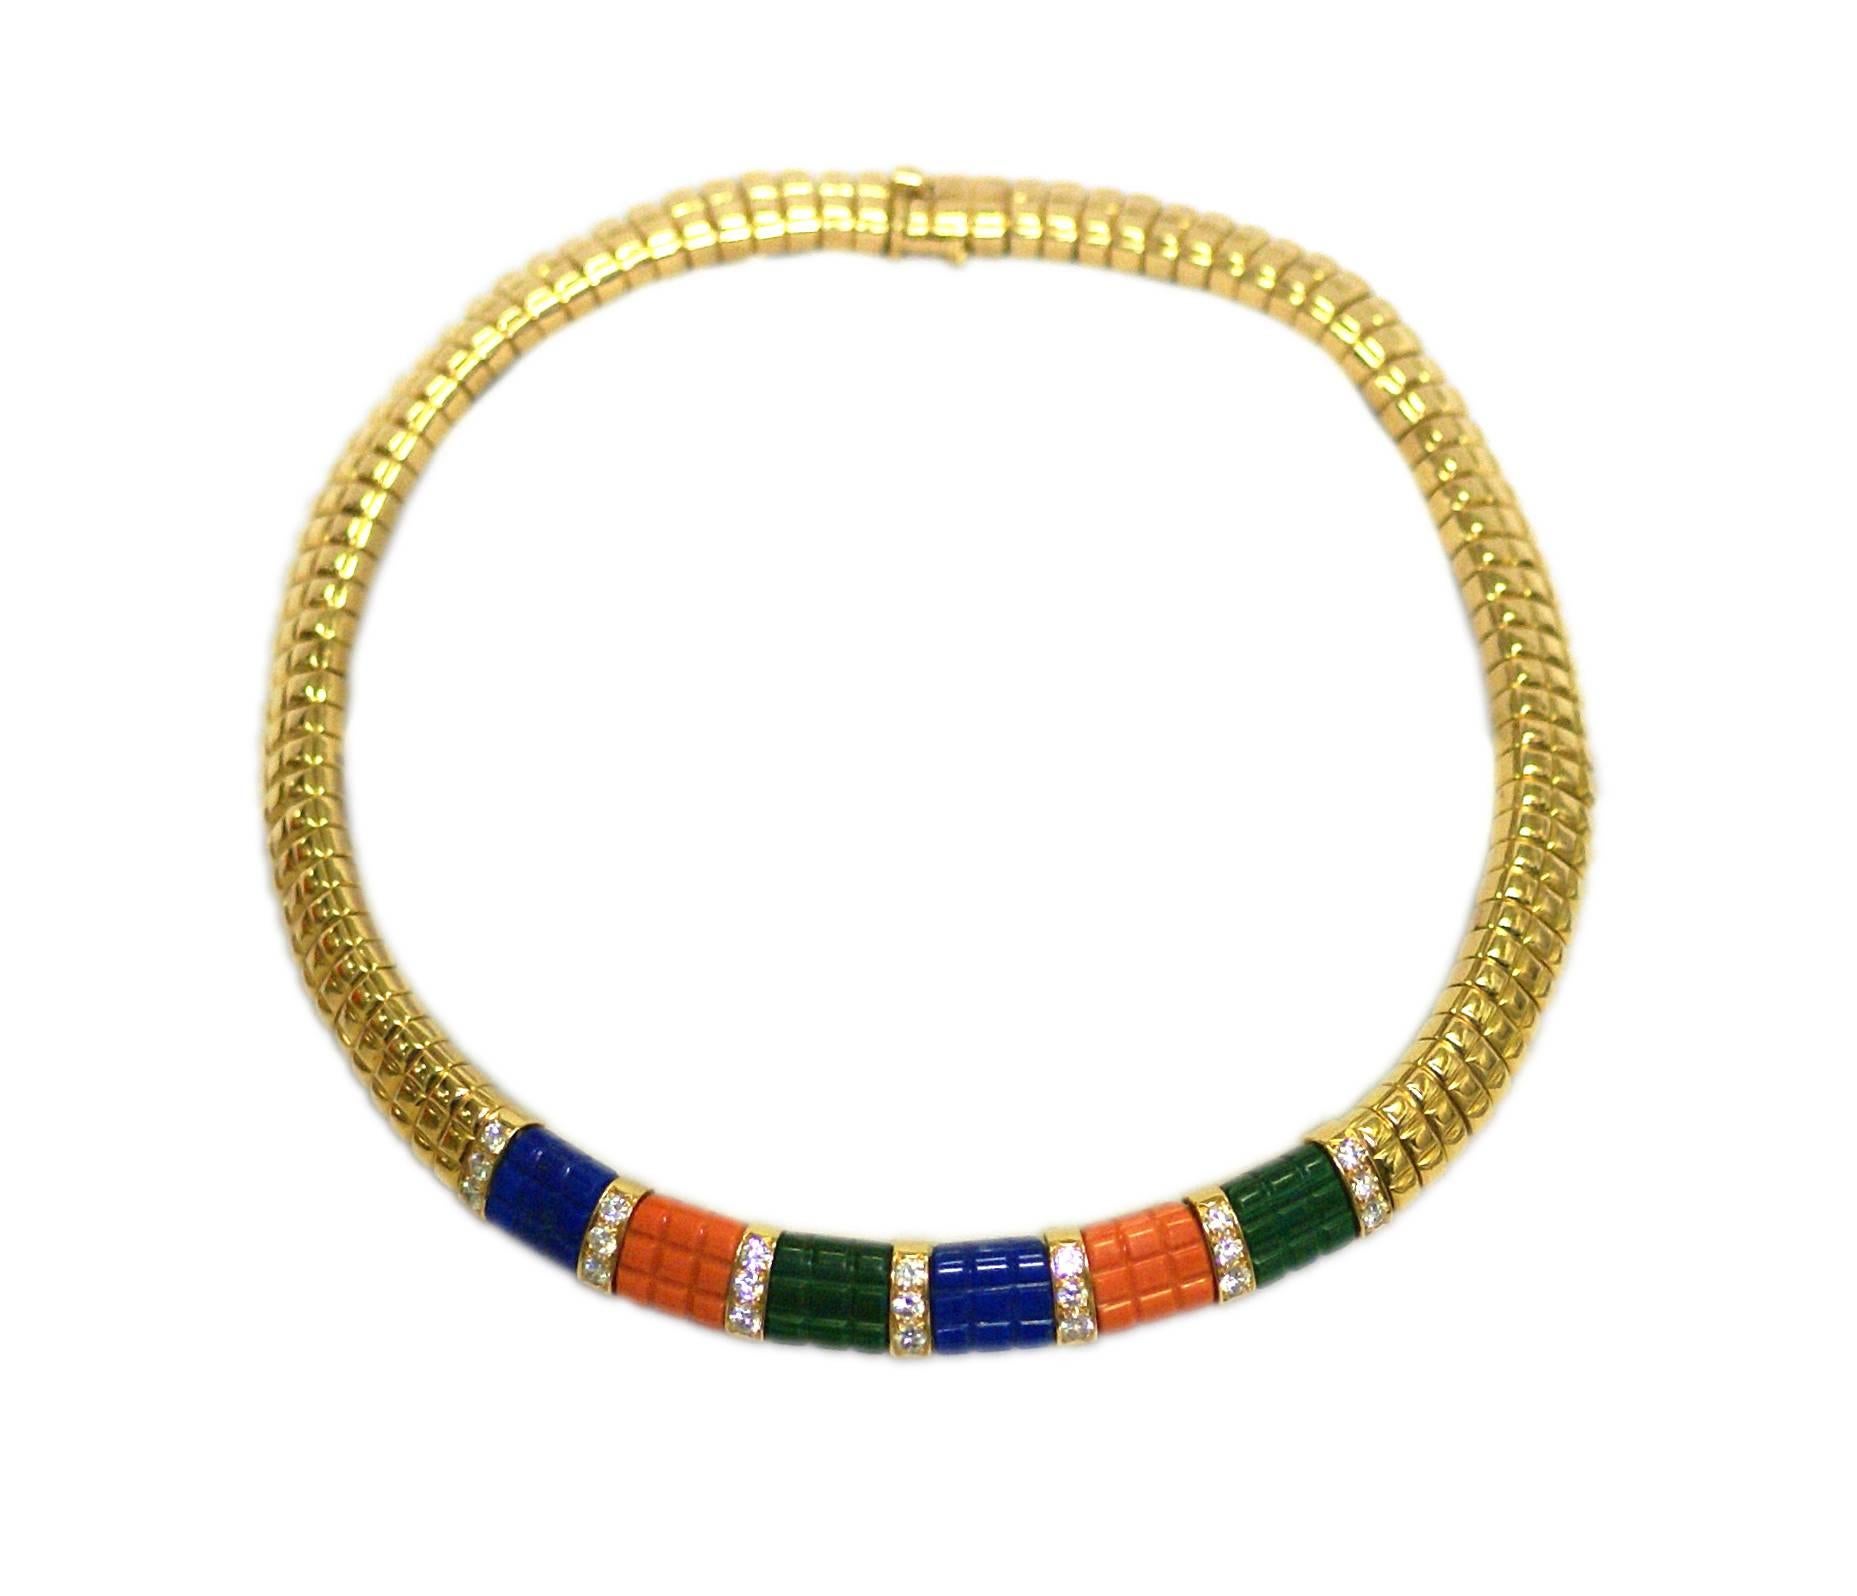 A sophisticated set comprised of necklace, bracelet and ring; of geometrical design, presenting alternated lapis, coral and malachite rectangular elements, highlighted and divided my diamond pavè sections. Signed Van Cleef & Arpels, circa 1985.